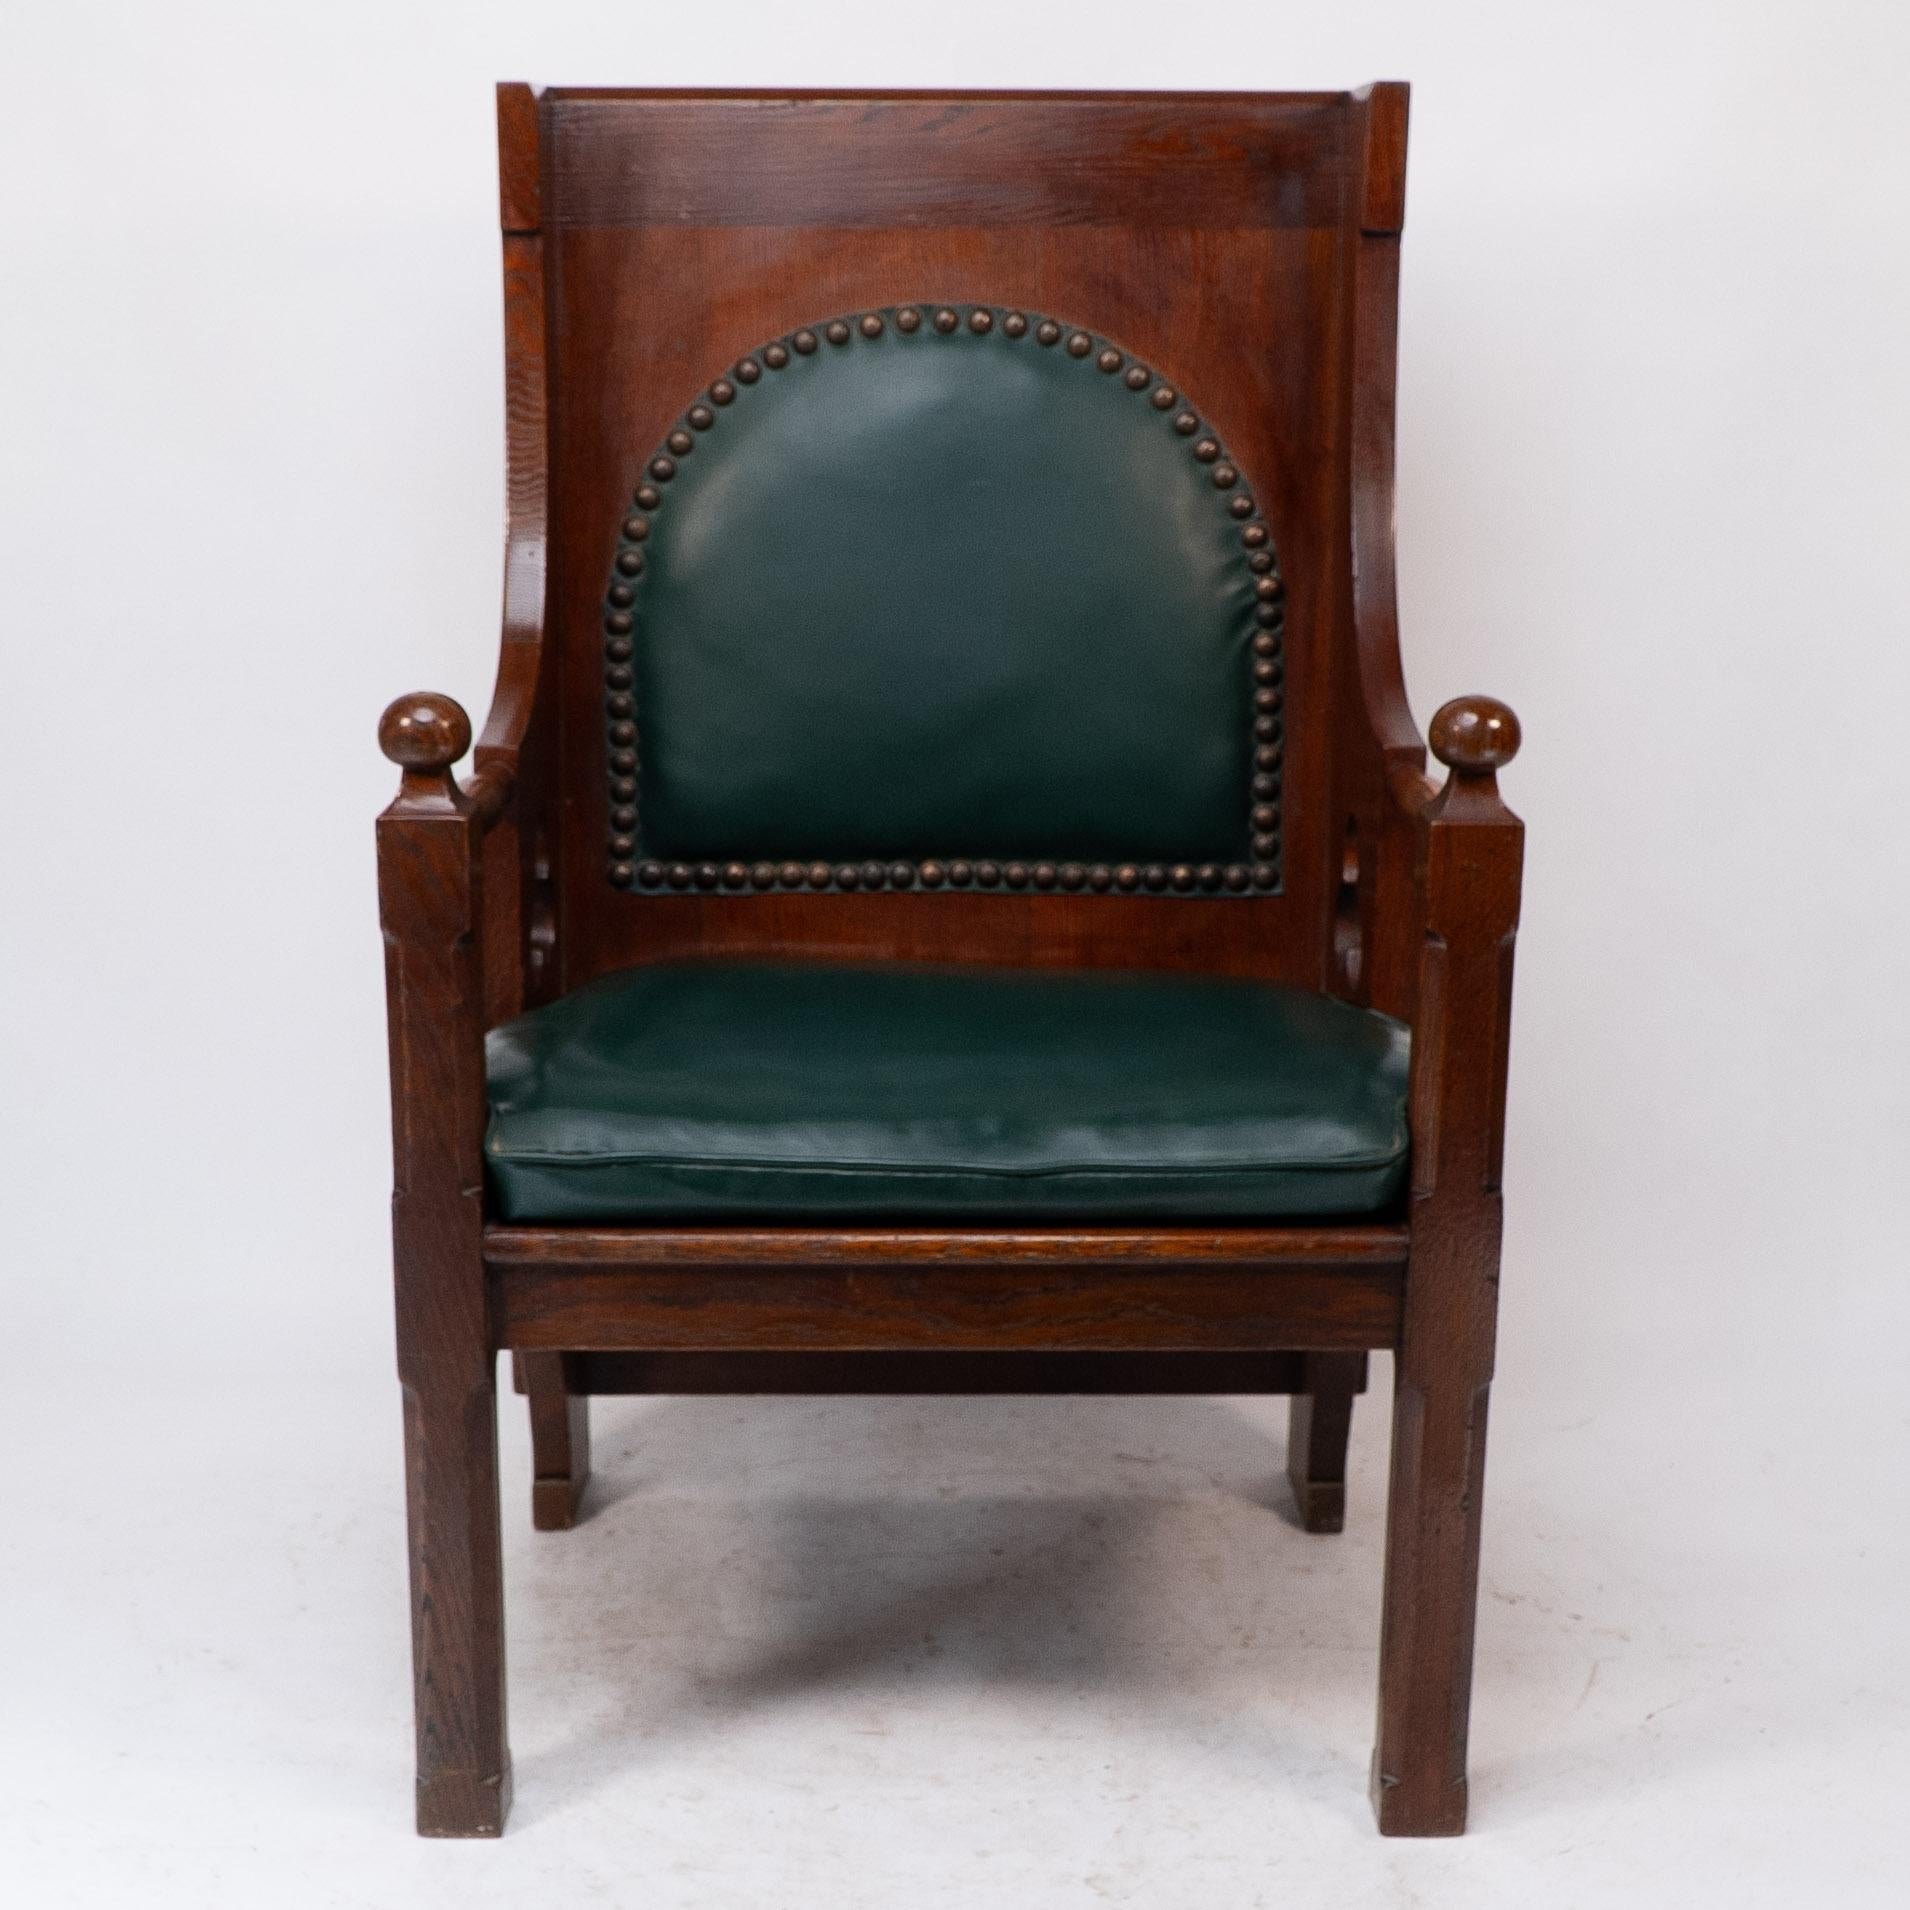 Liberty and Co. A good quality Arts and Crafts oak armchair, with original Liberty label to the underneath.